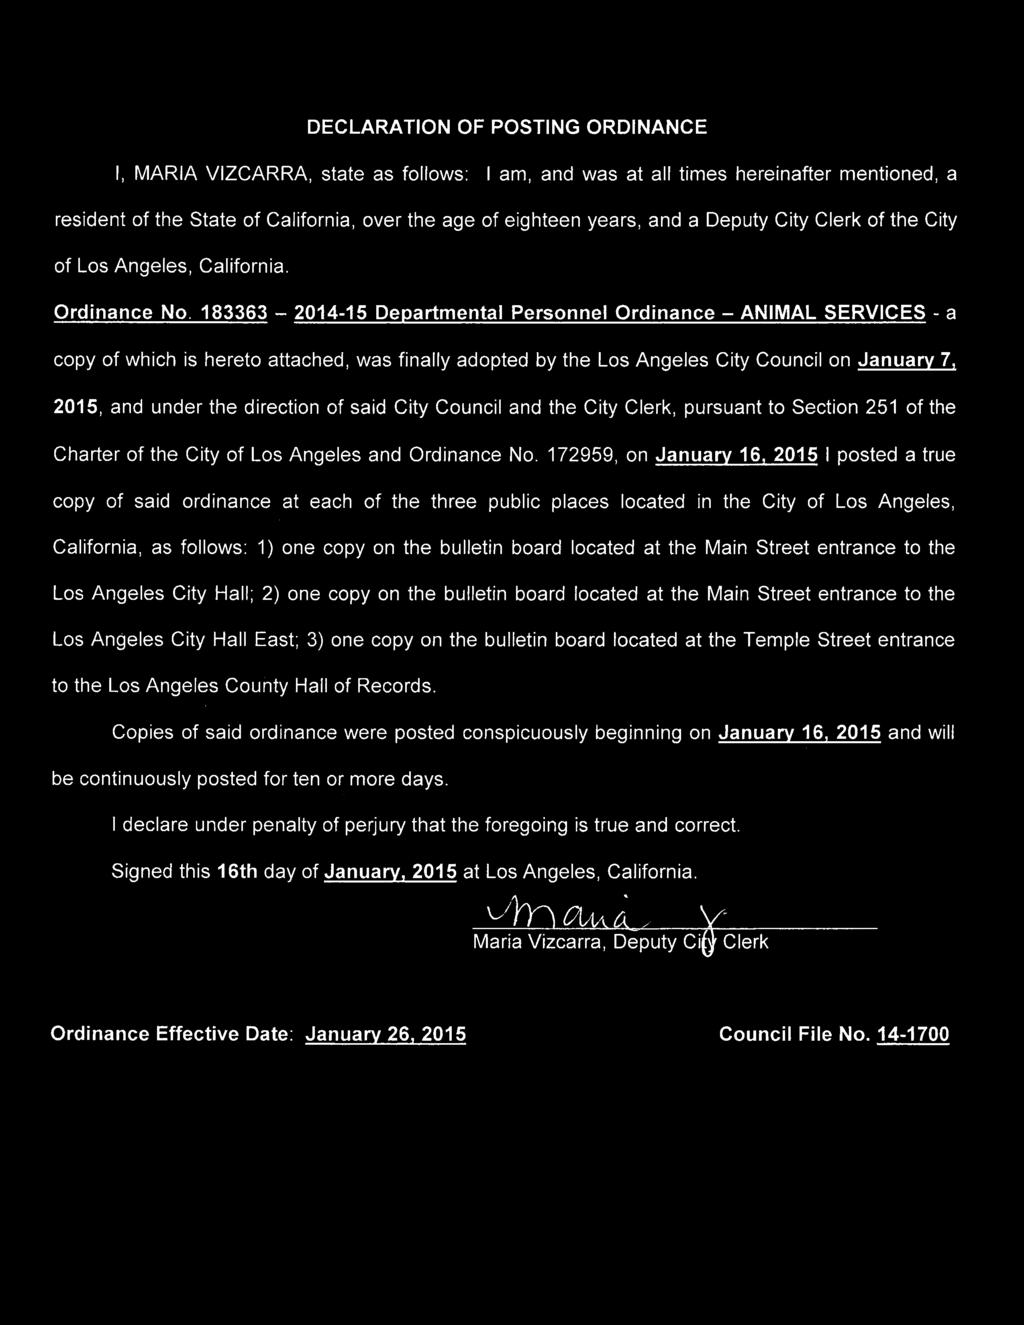 183363 2014-15 Departmental Personnel Ordinance ANIMAL SERVICES - a copy of which is hereto attached, was finally adopted by the Los Angeles City Council on January 7, 2015, and under the direction